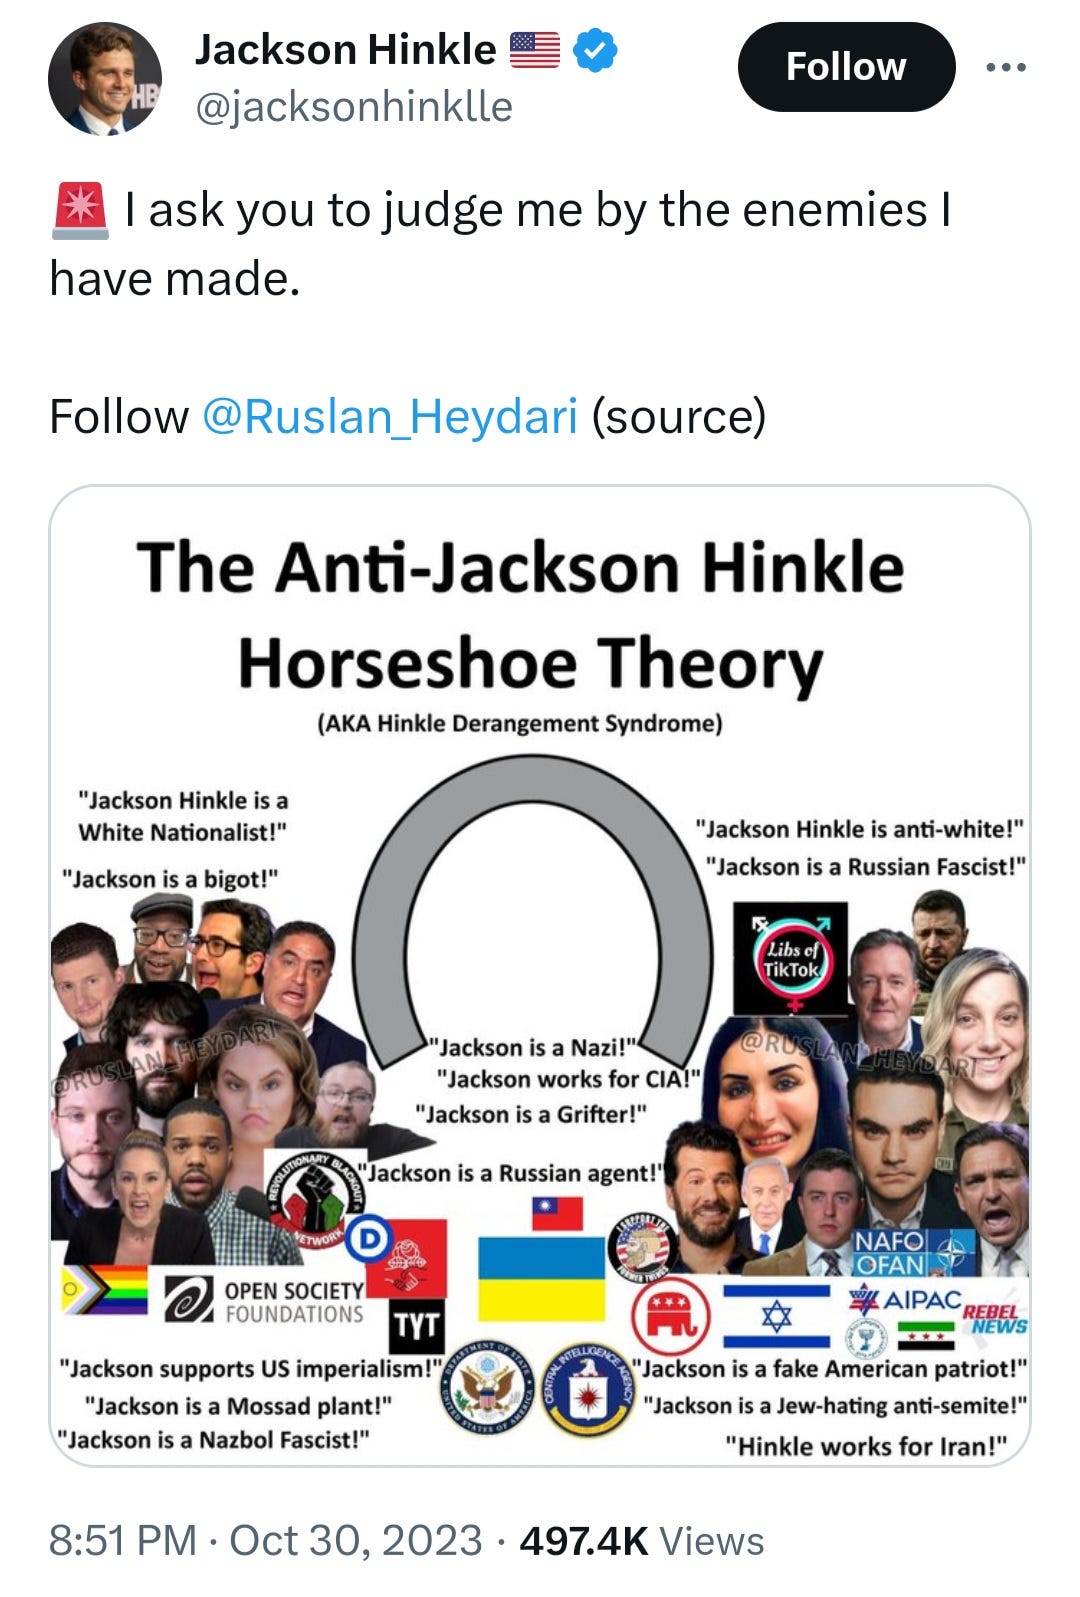 Jackson Hinkle tweet where he included a graphic of the Anti-Jackson Hinkle Horseshoe Theory which includes the faces of people whom he had denounced like right-wing commentator Ben Shapiro and Ukrainian President Volodymyr Zelenskyy.